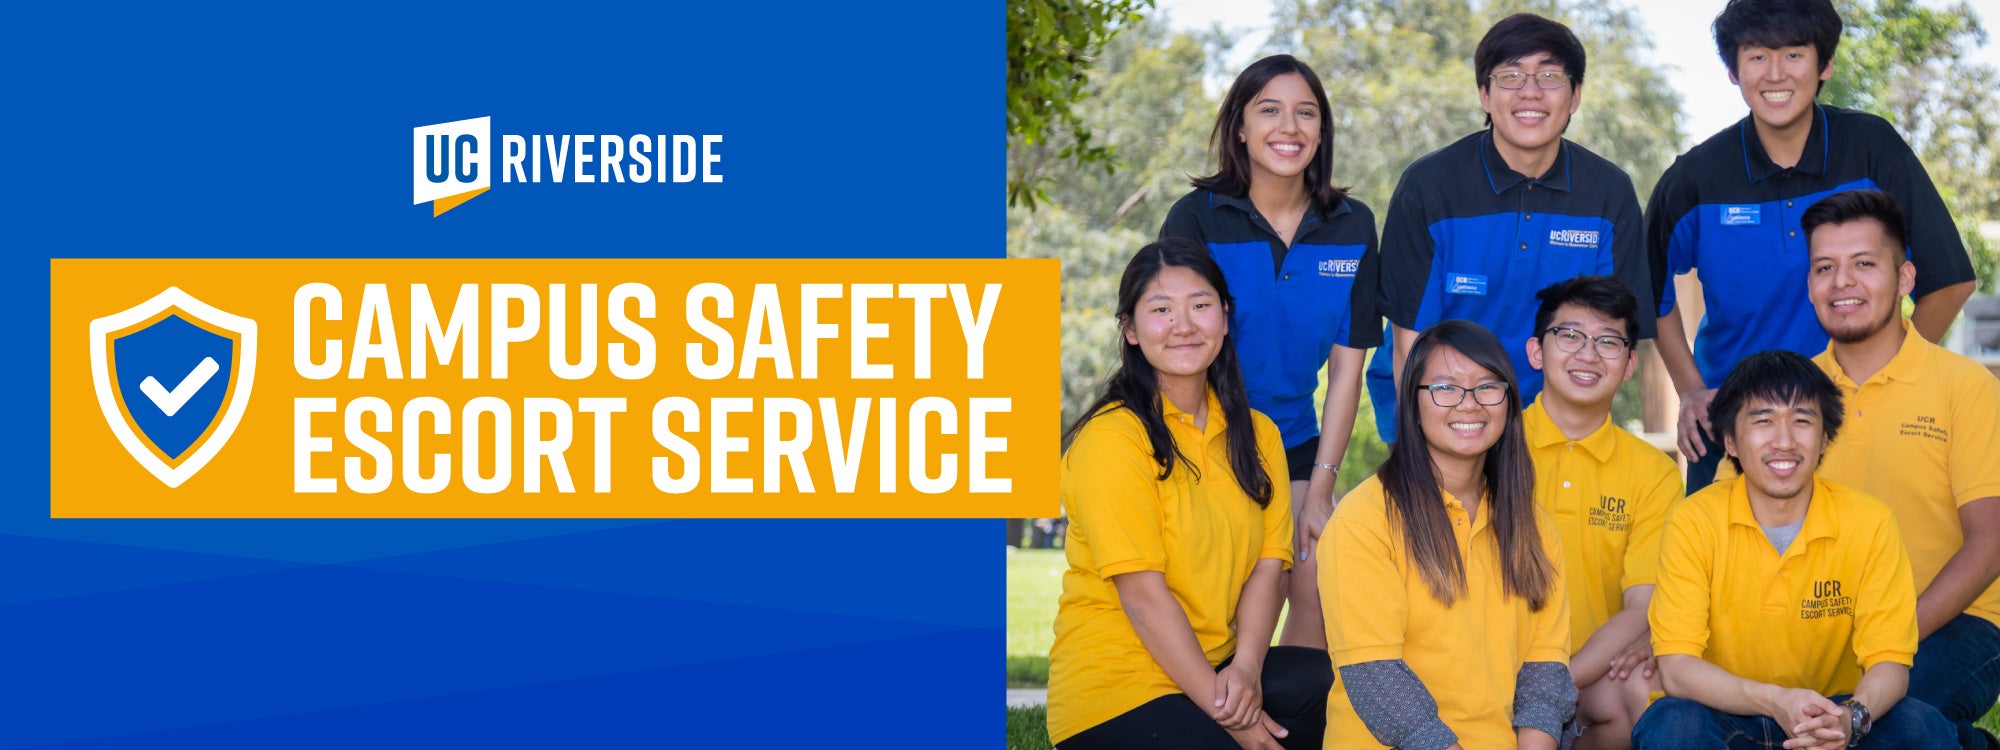 Group photo of UCR's Campus Safety Escort Service students